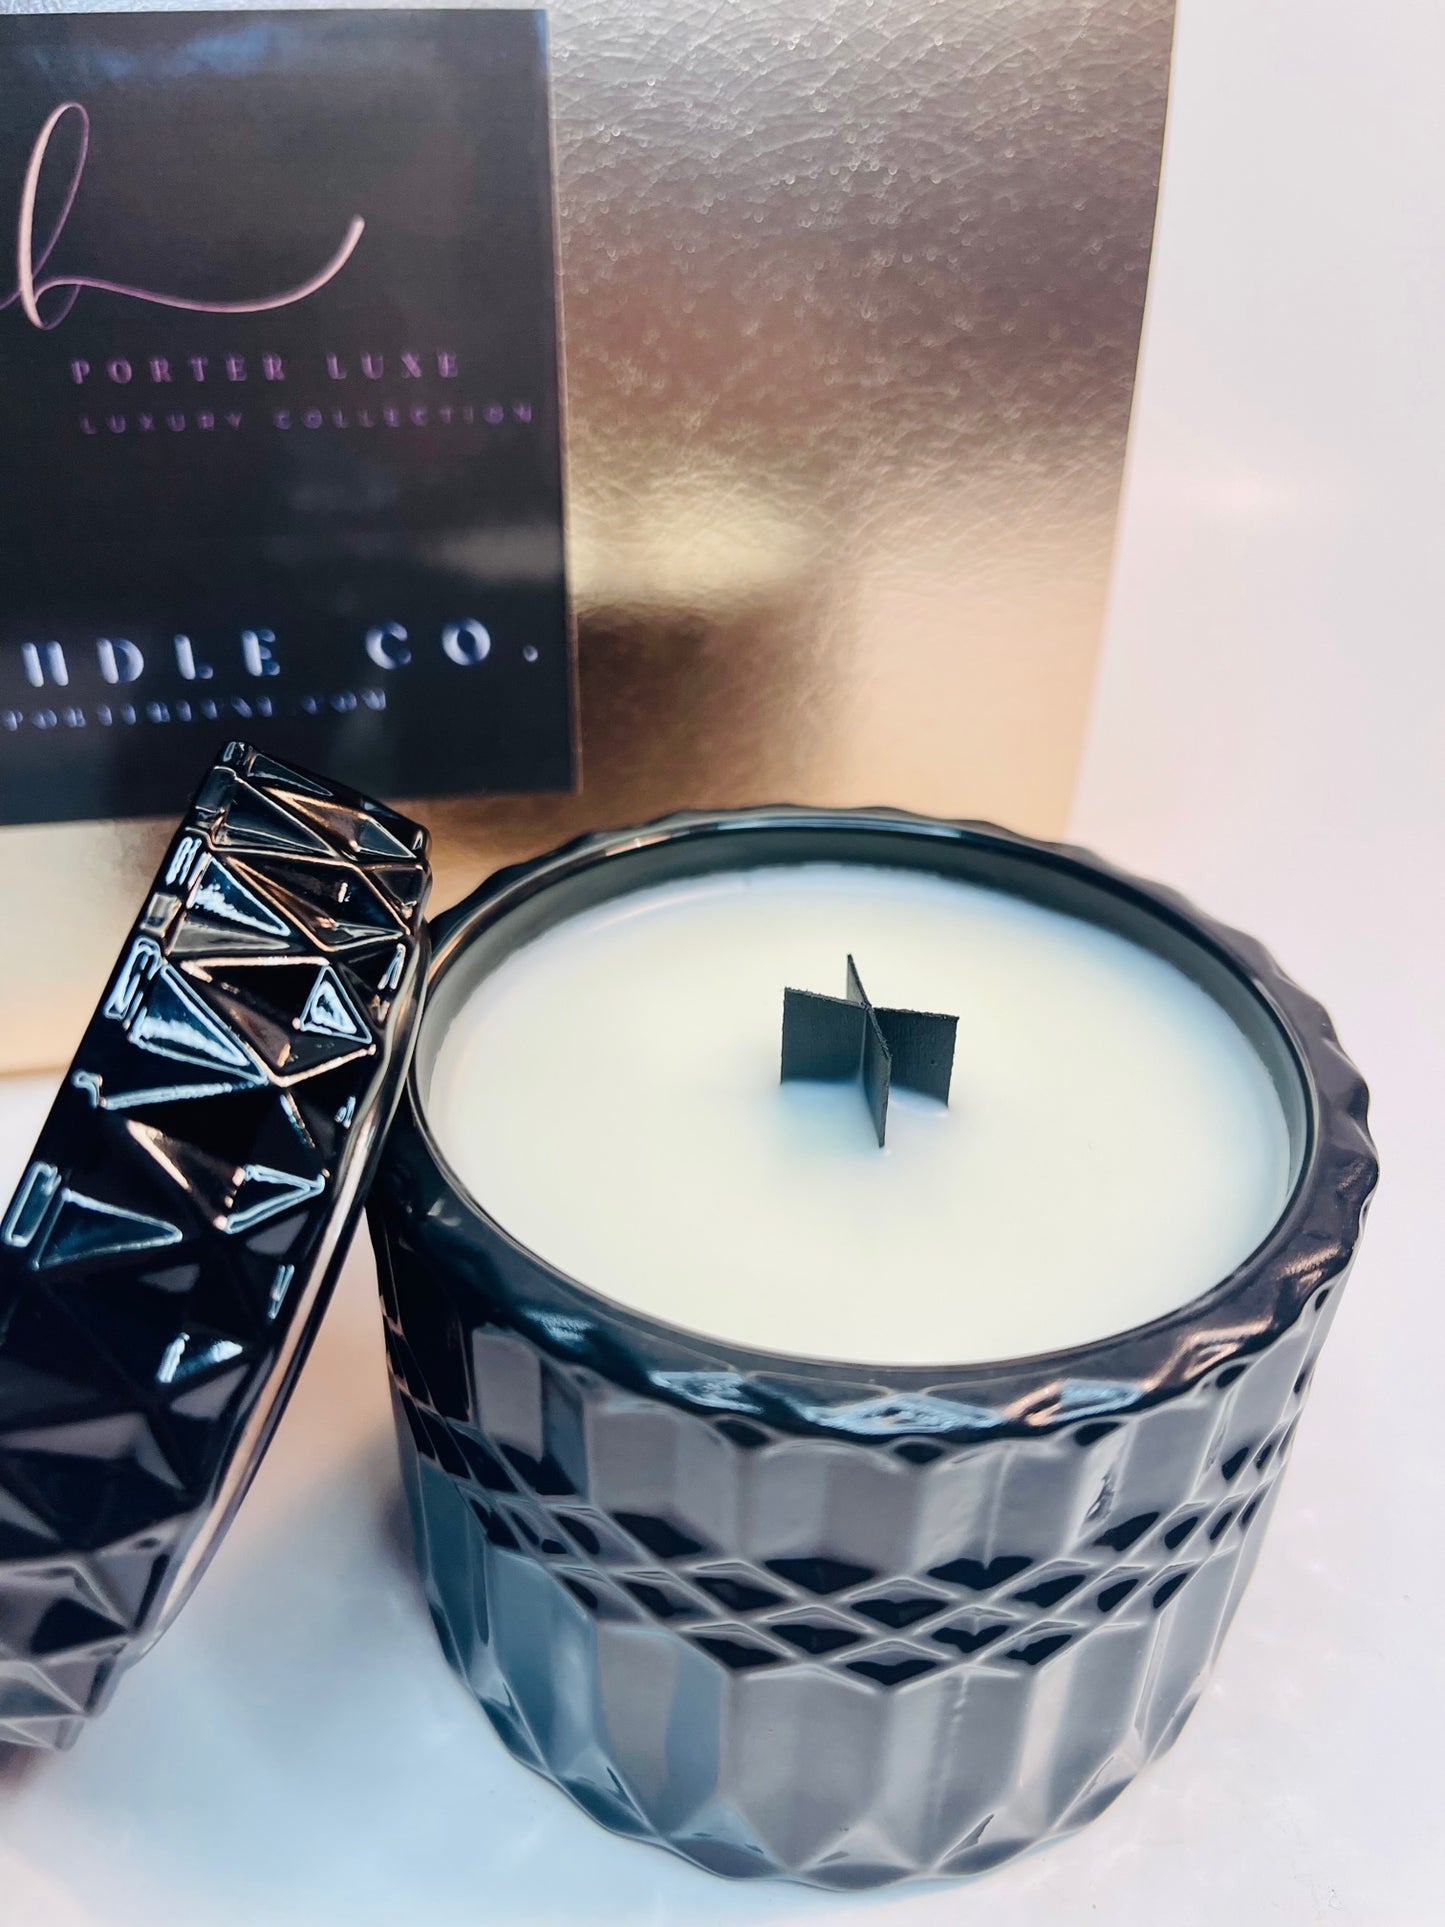 Porter Luxe - Cuffing Season Candle (Sultry Woody)